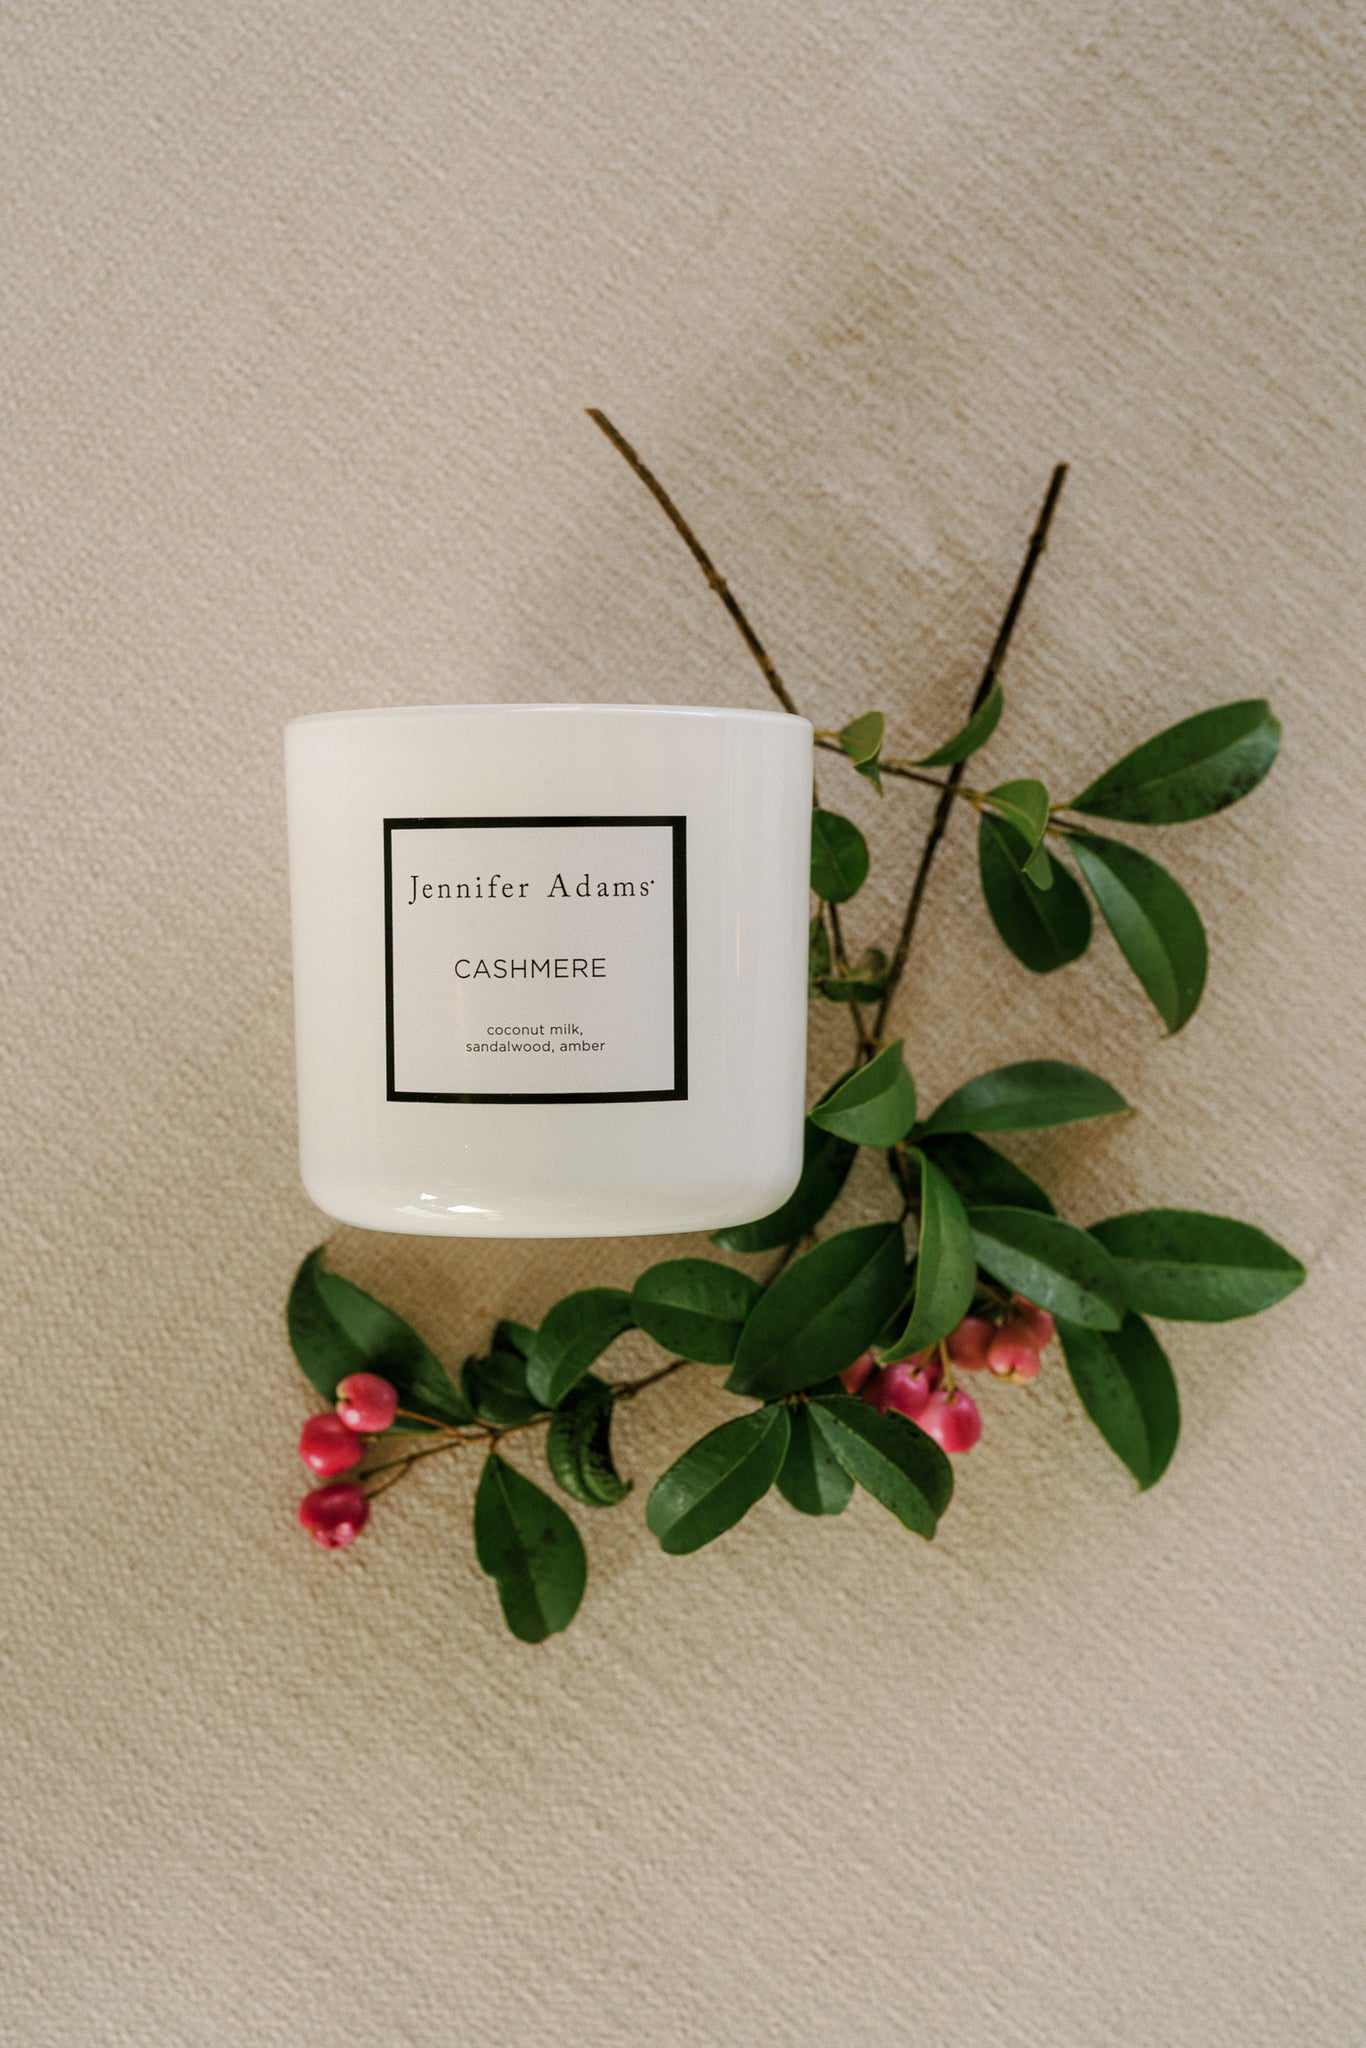 Candles in warm, welcoming scents